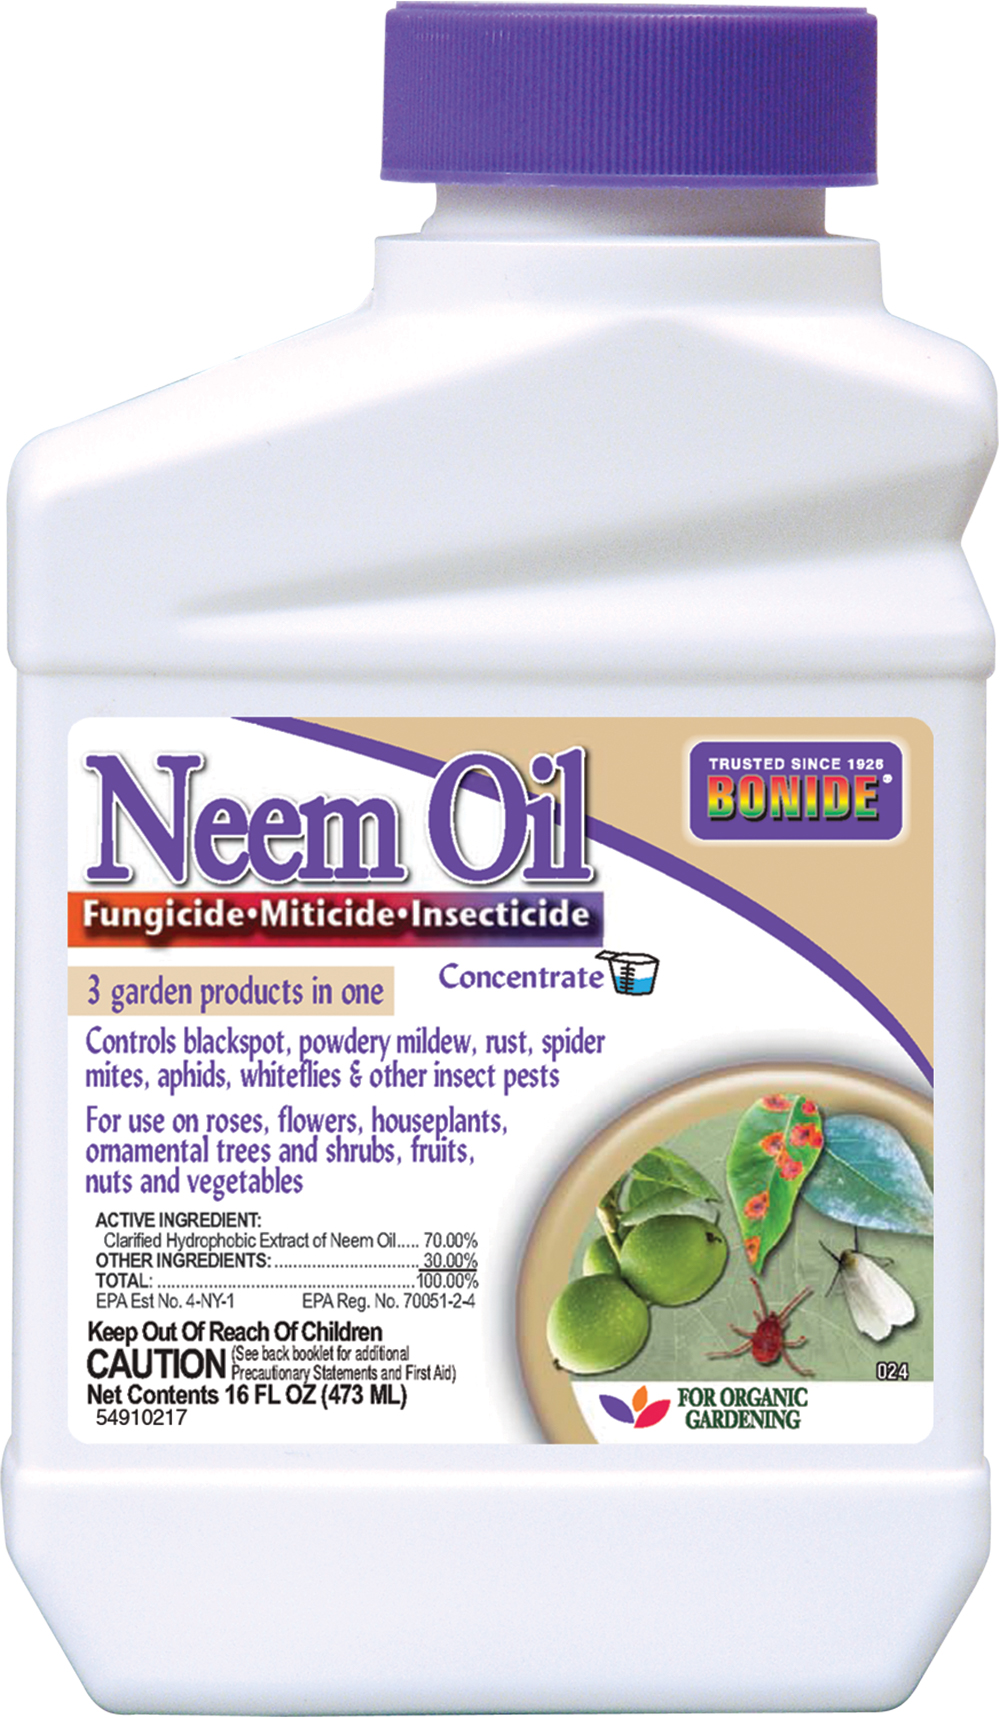 Bonide 024 Concentrate Neem Oil Insect Repellent, 16-Ounce - image 1 of 2